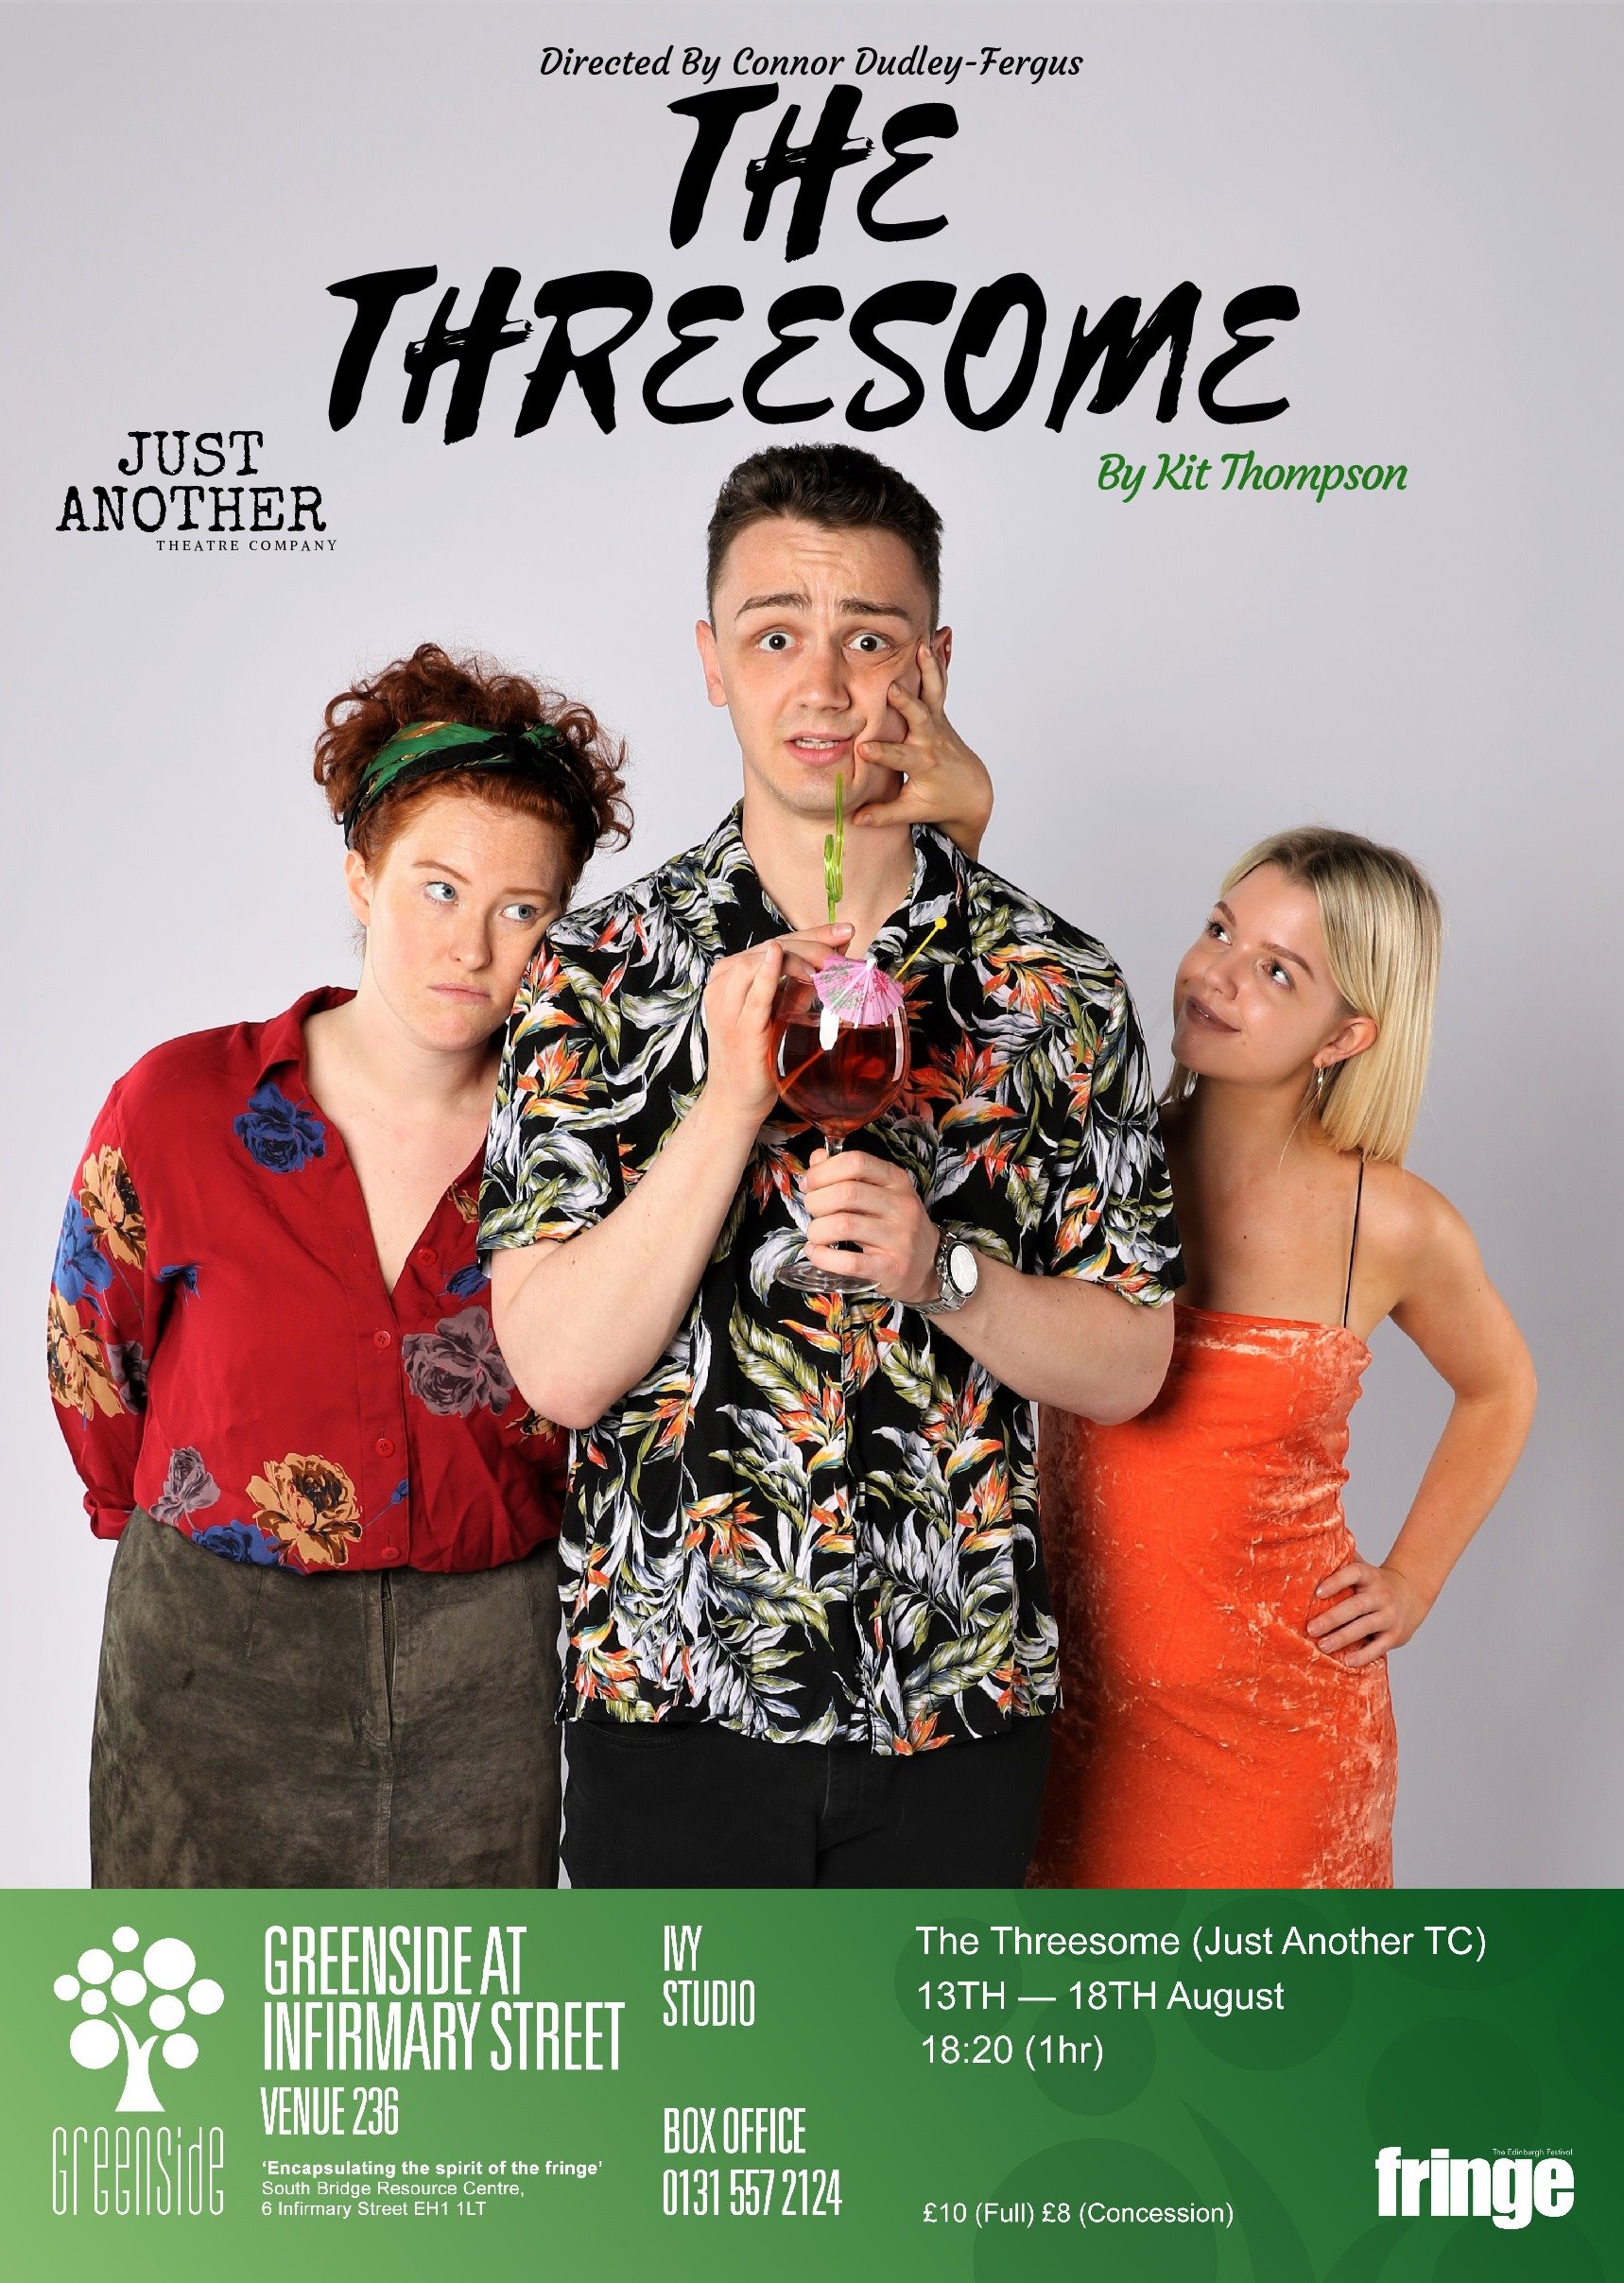 The poster for The Threesome